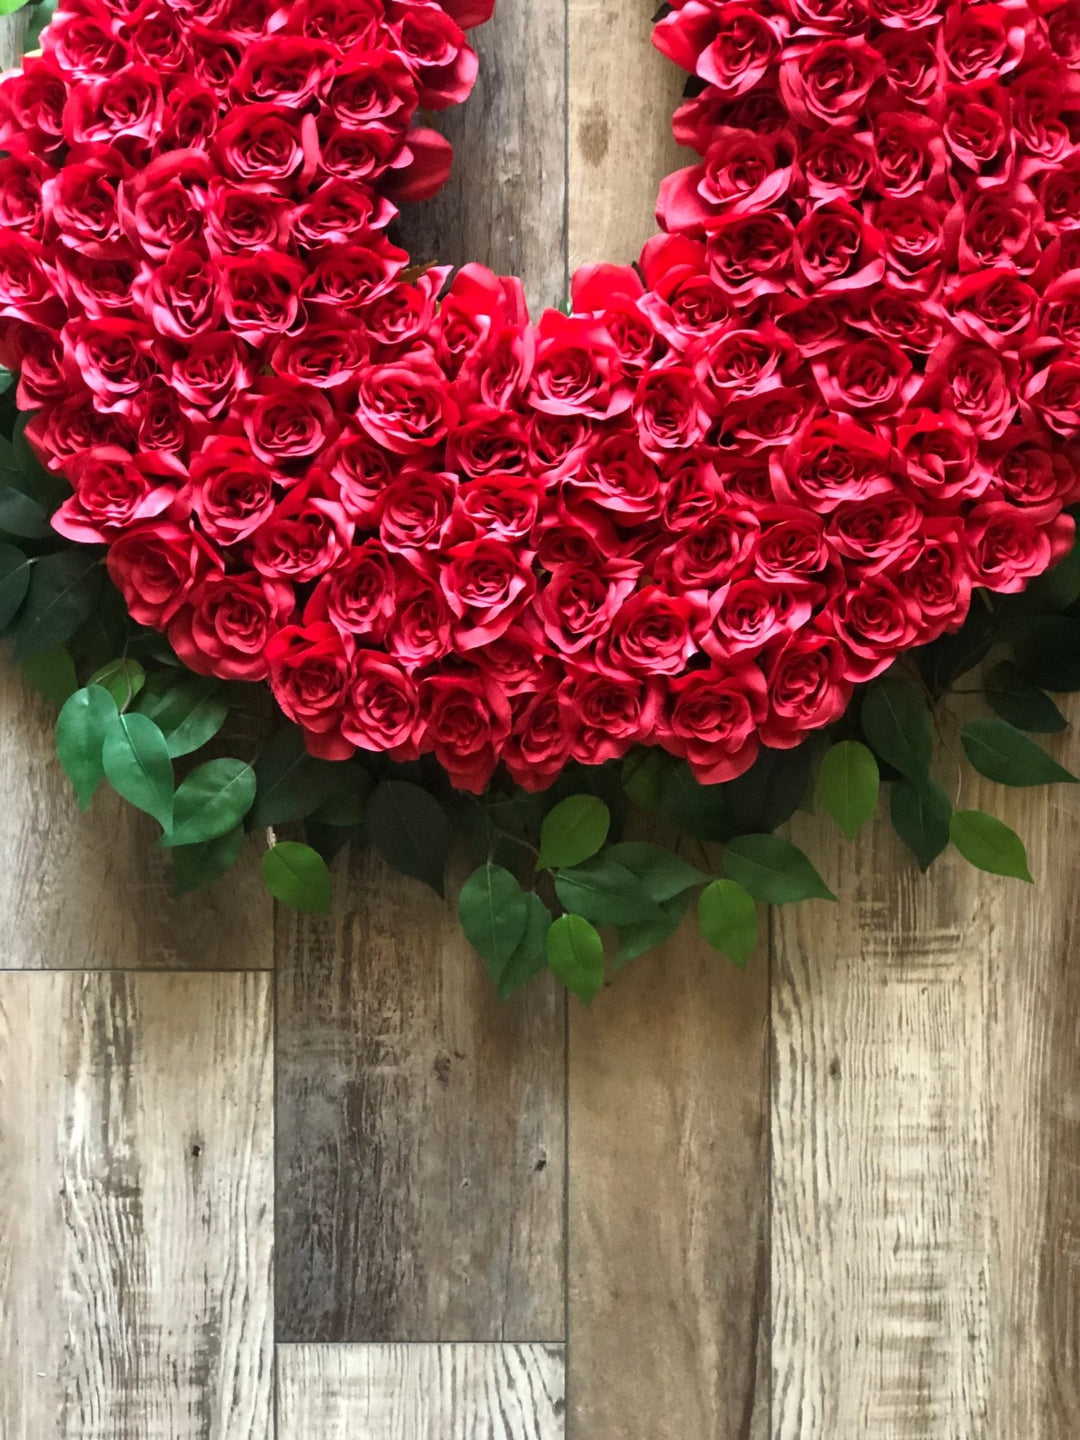 Kentucky Derby Horseshoe Wreath Covered In Red Roses